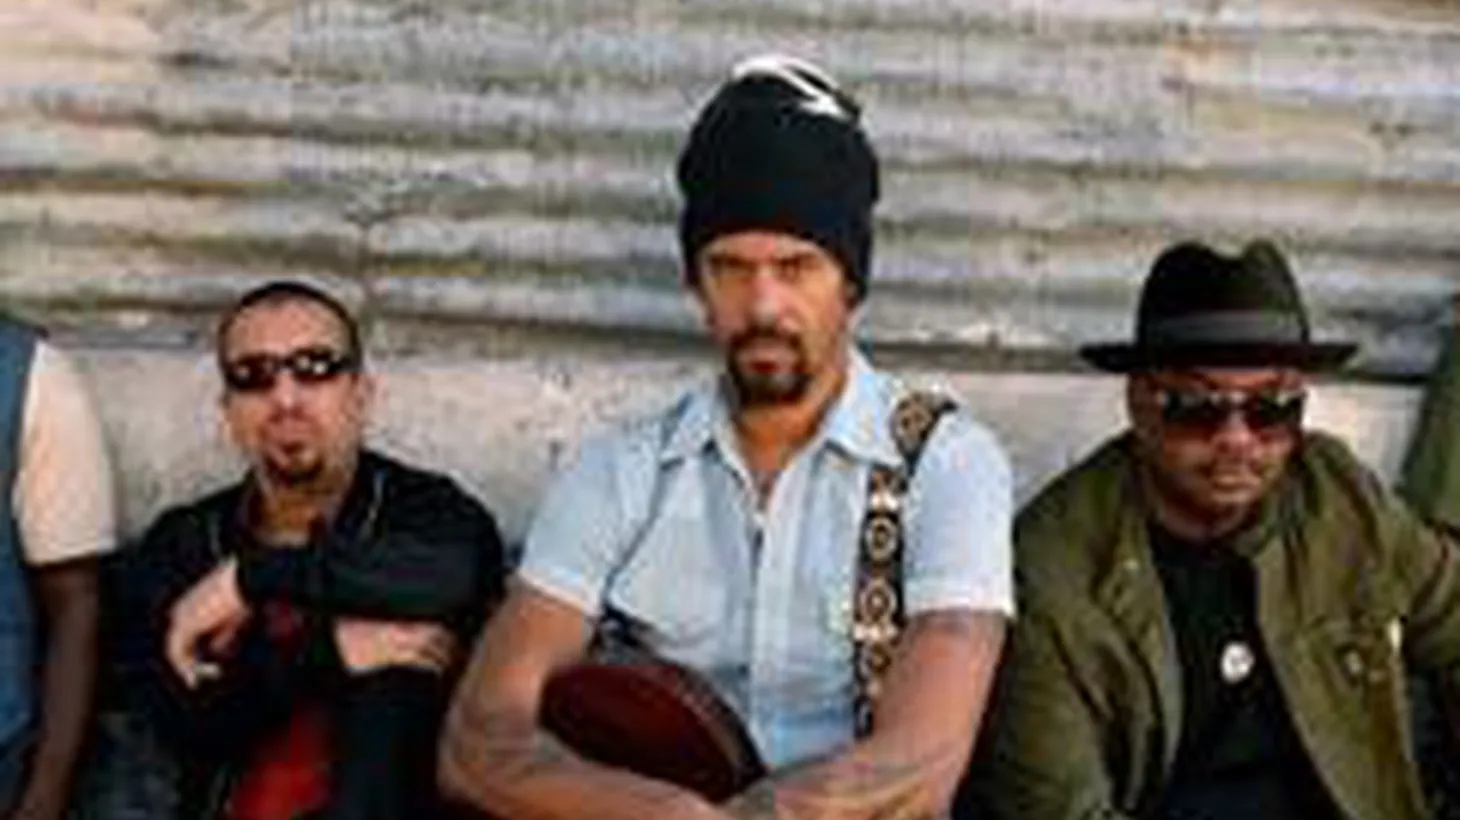 Michael Franti and Spearhead return with inspired and socially ignited songs on Morning Becomes Eclectic at 11:15am.